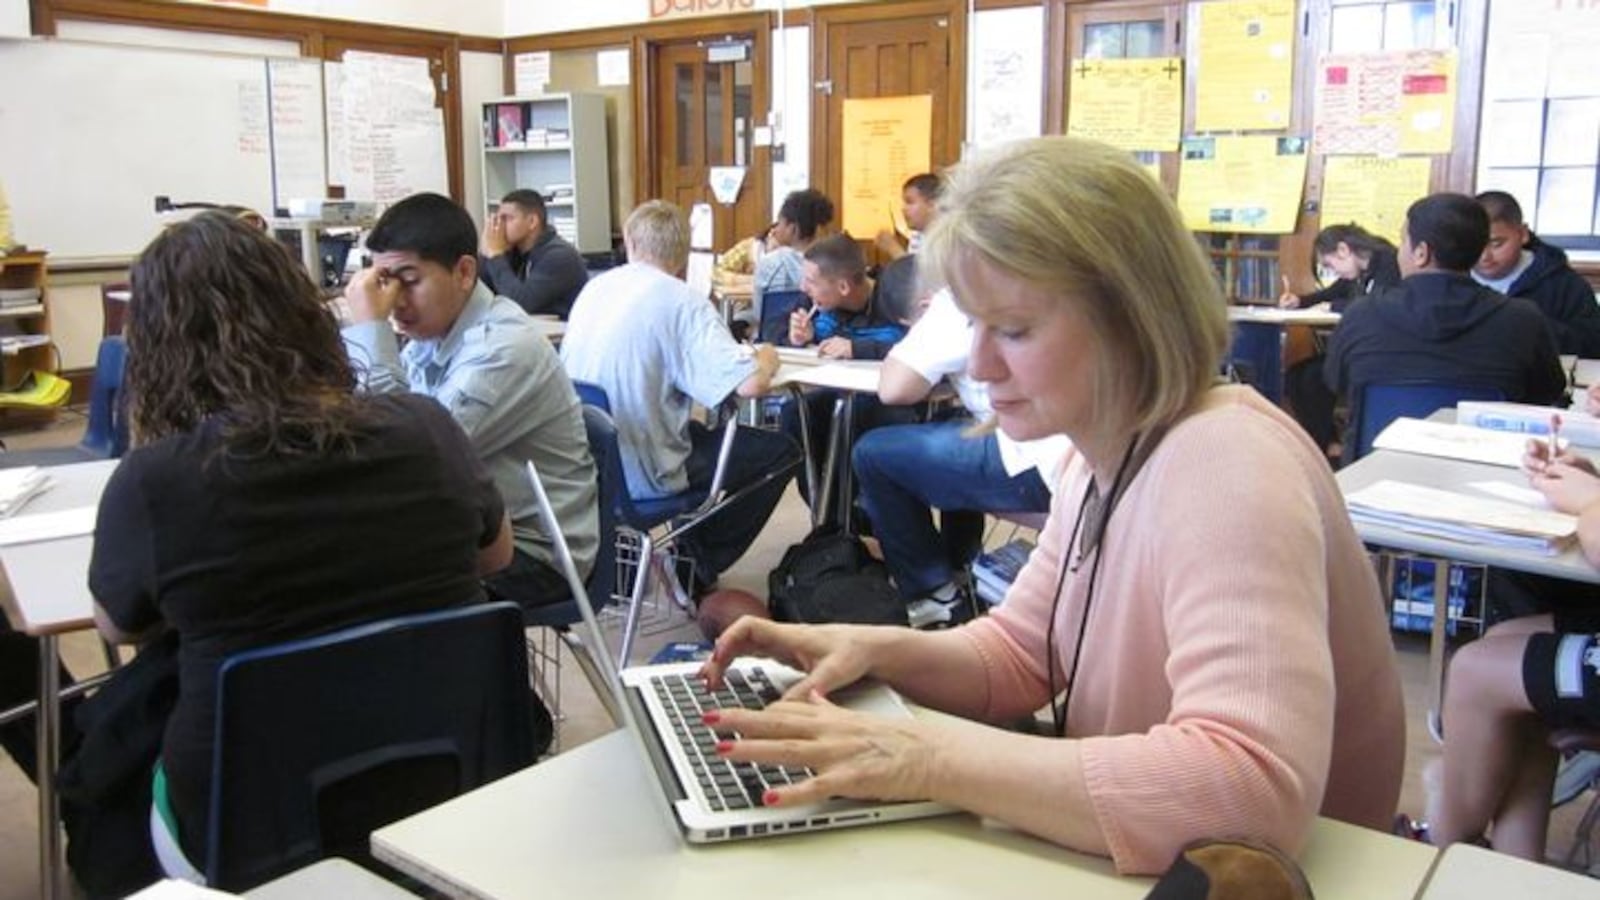 A DPS peer observer sitting in on a class at West High School in 2012.